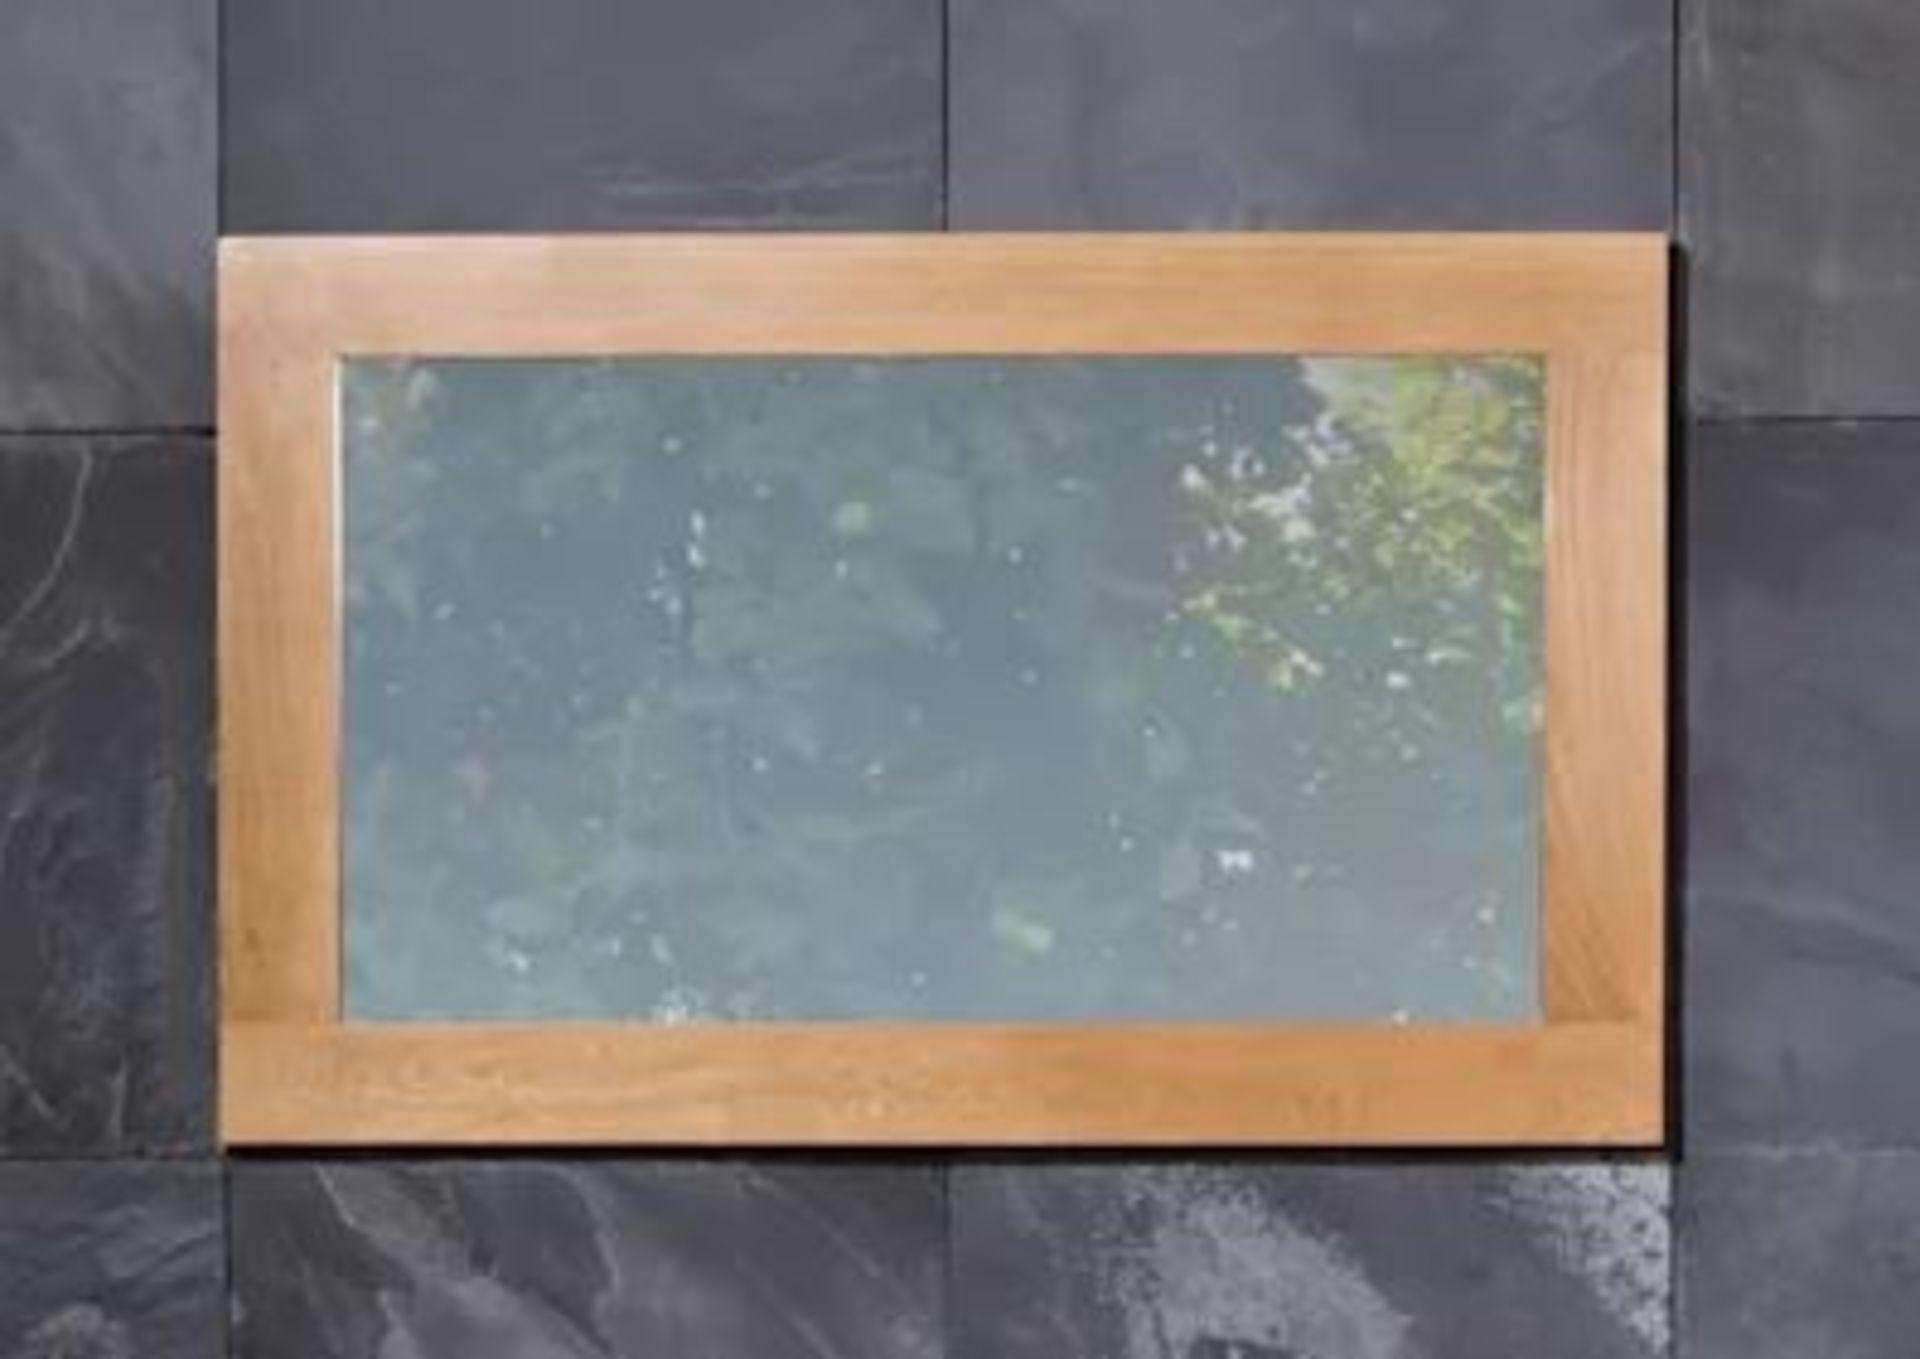 1 x Stonearth Large Bathroom Wall Mirror - American Solid Oak Frame With Bevelled Glass - Size: H750 - Image 9 of 12